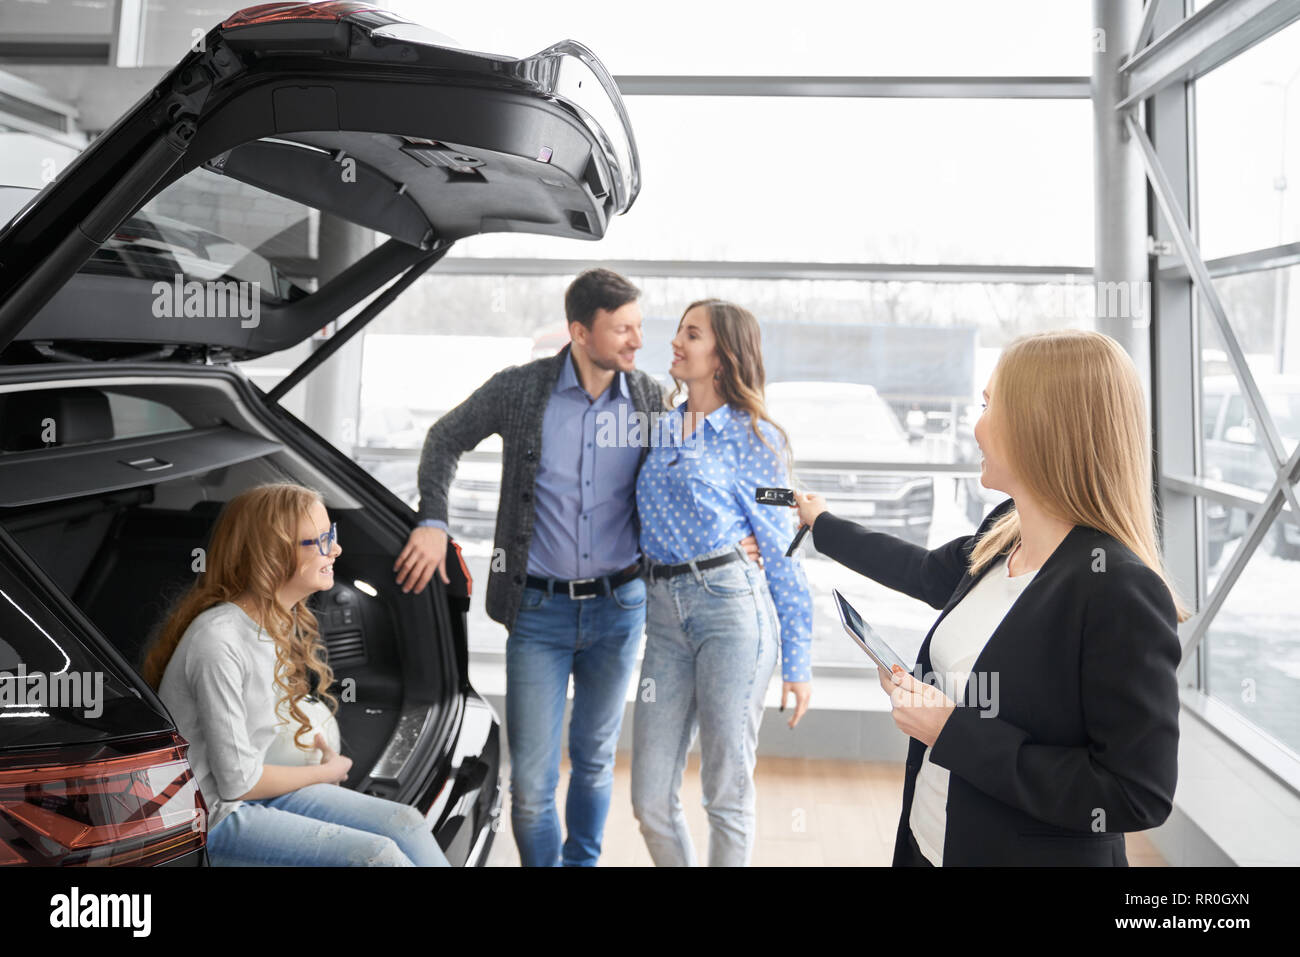 Manager of car dealership working with clients, holding folder and giving car keys to buyers of vehicle. Couple standing, posing, daughter sitting in car trunk, smiling. Stock Photo